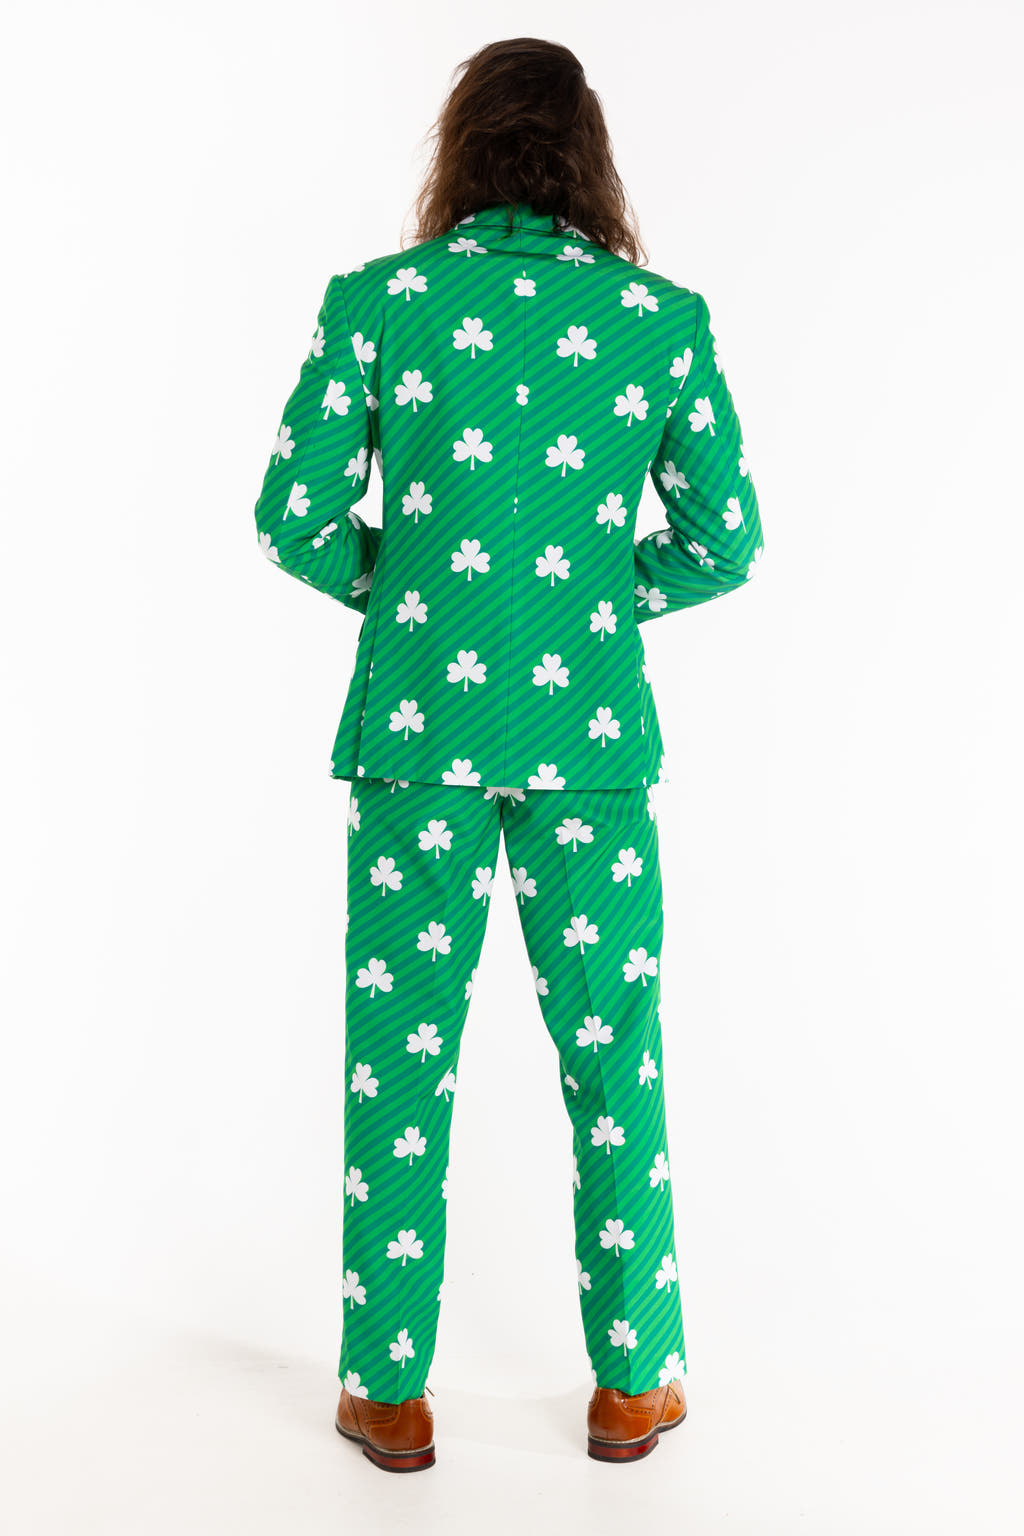 Clover green and white suit